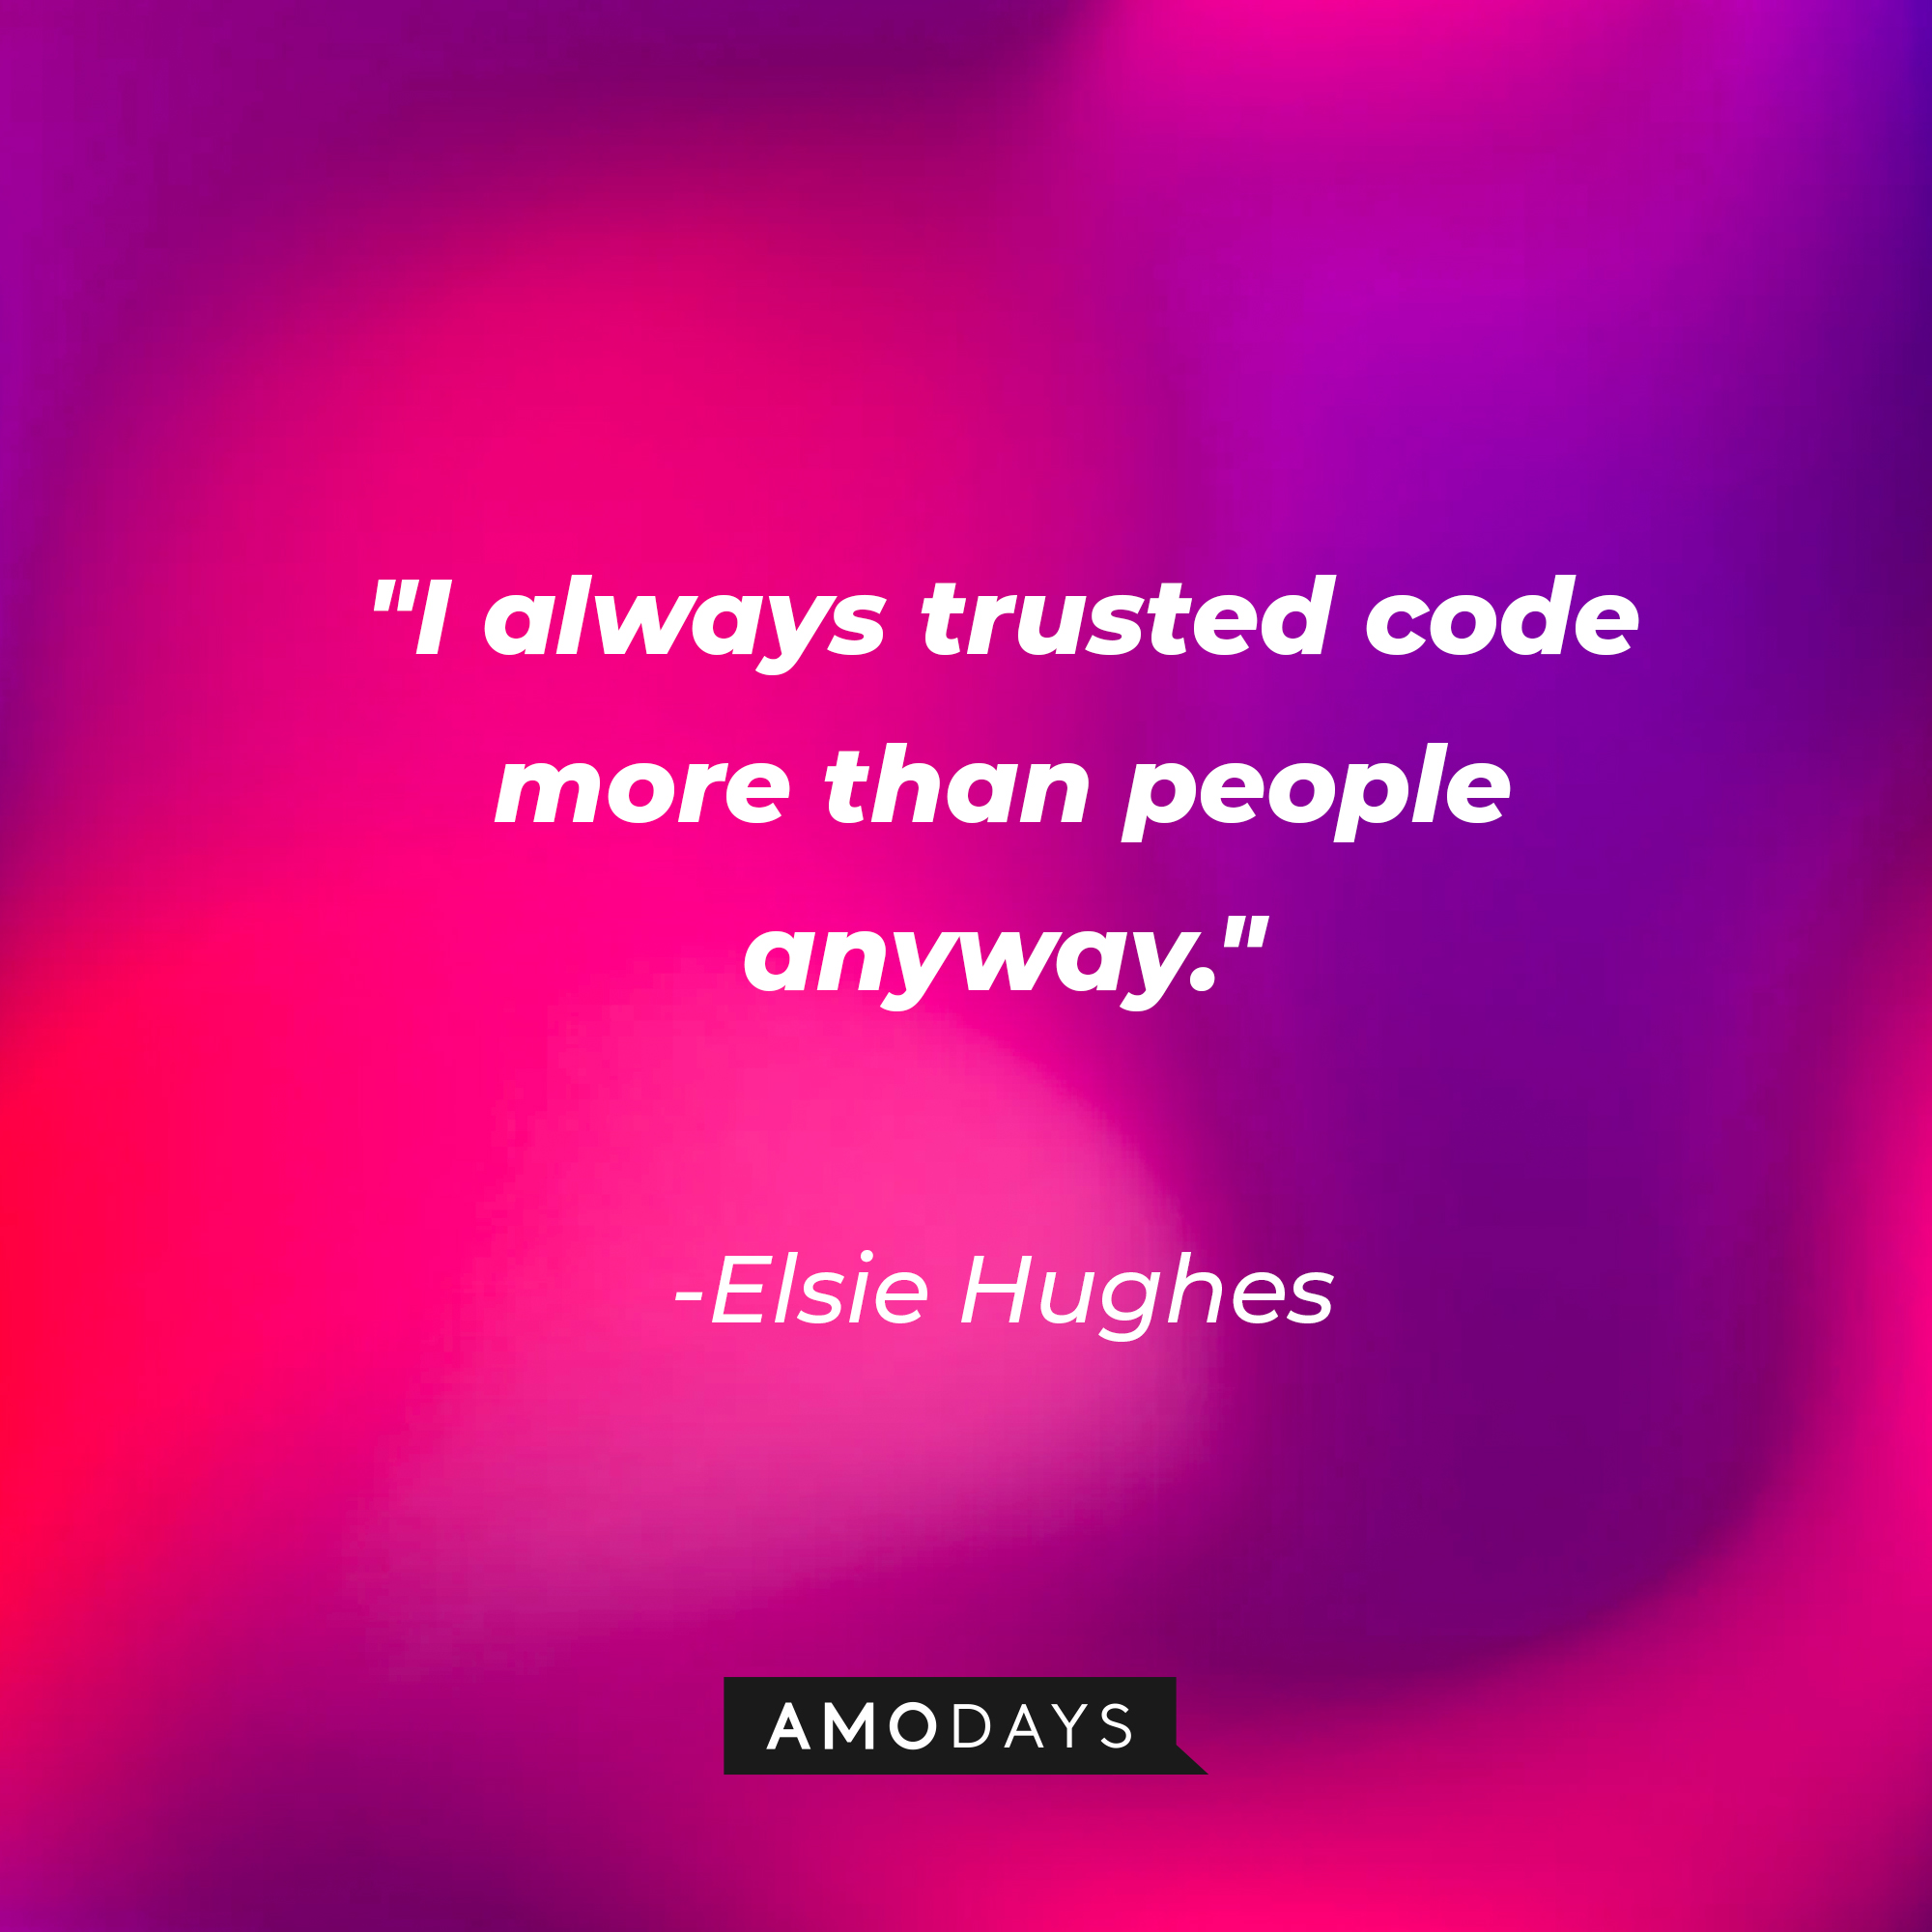 Elsie Hughes' quote: "I always trusted code more than people anyway." | Source: AmoDays